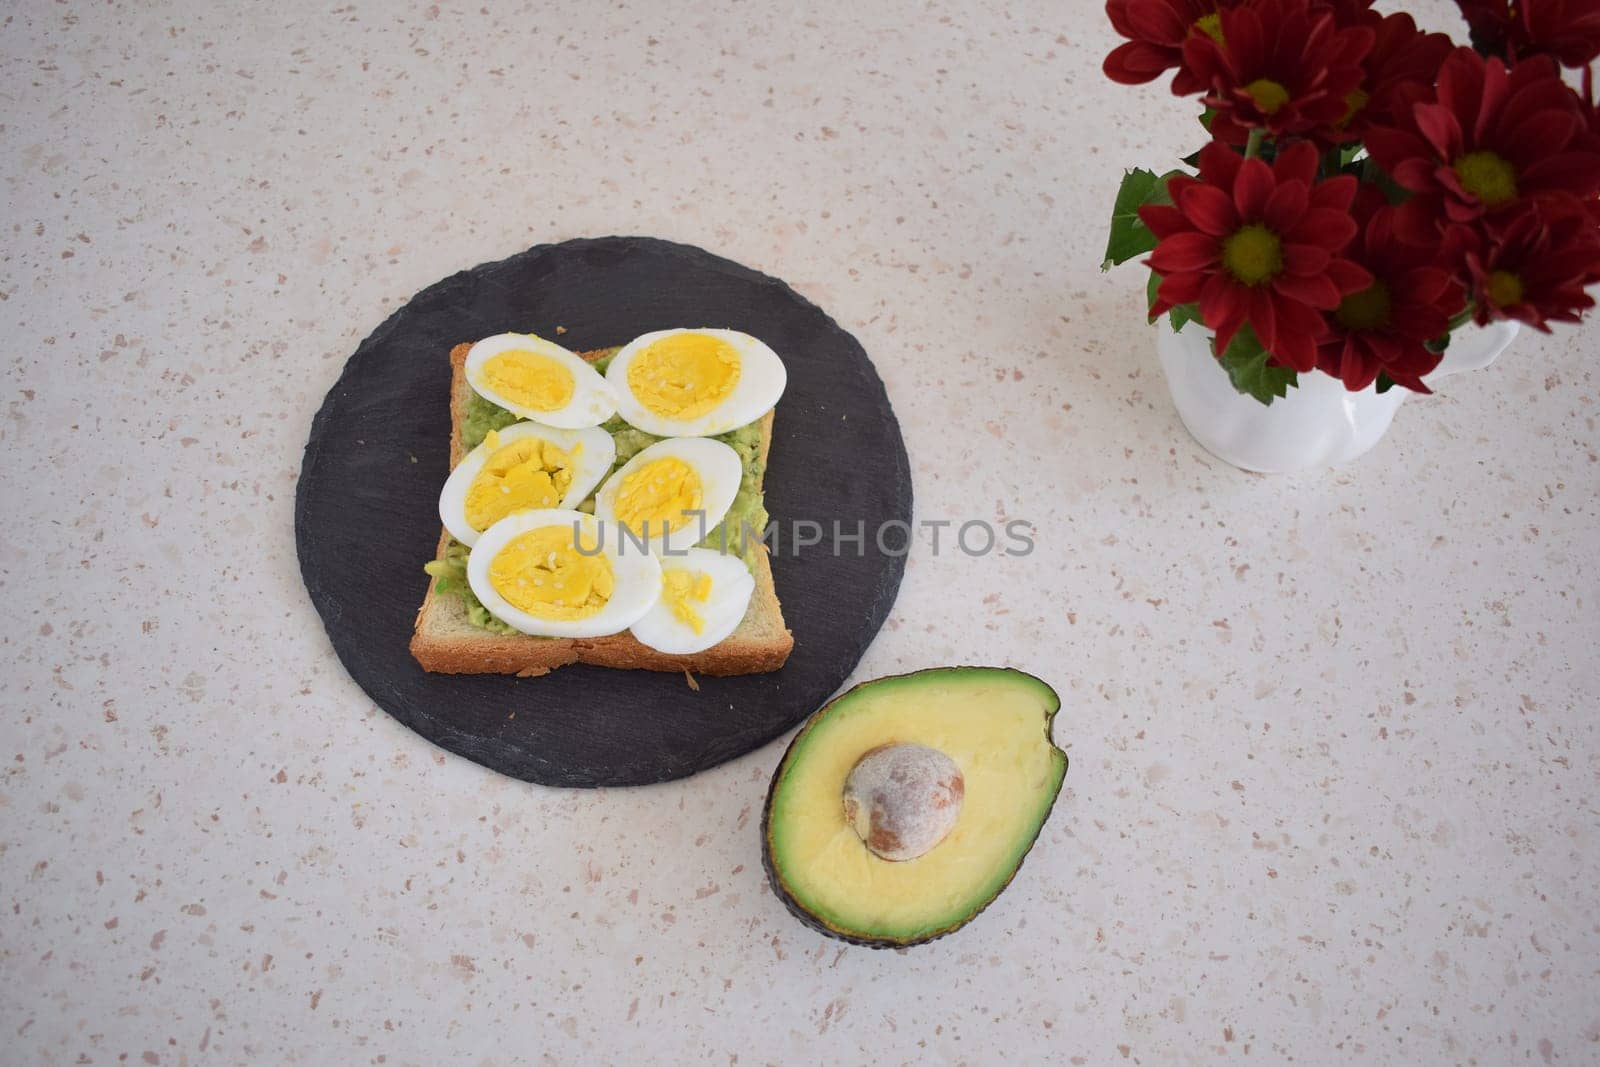 Healthy breakfast toast with egg, avocado and herbs.